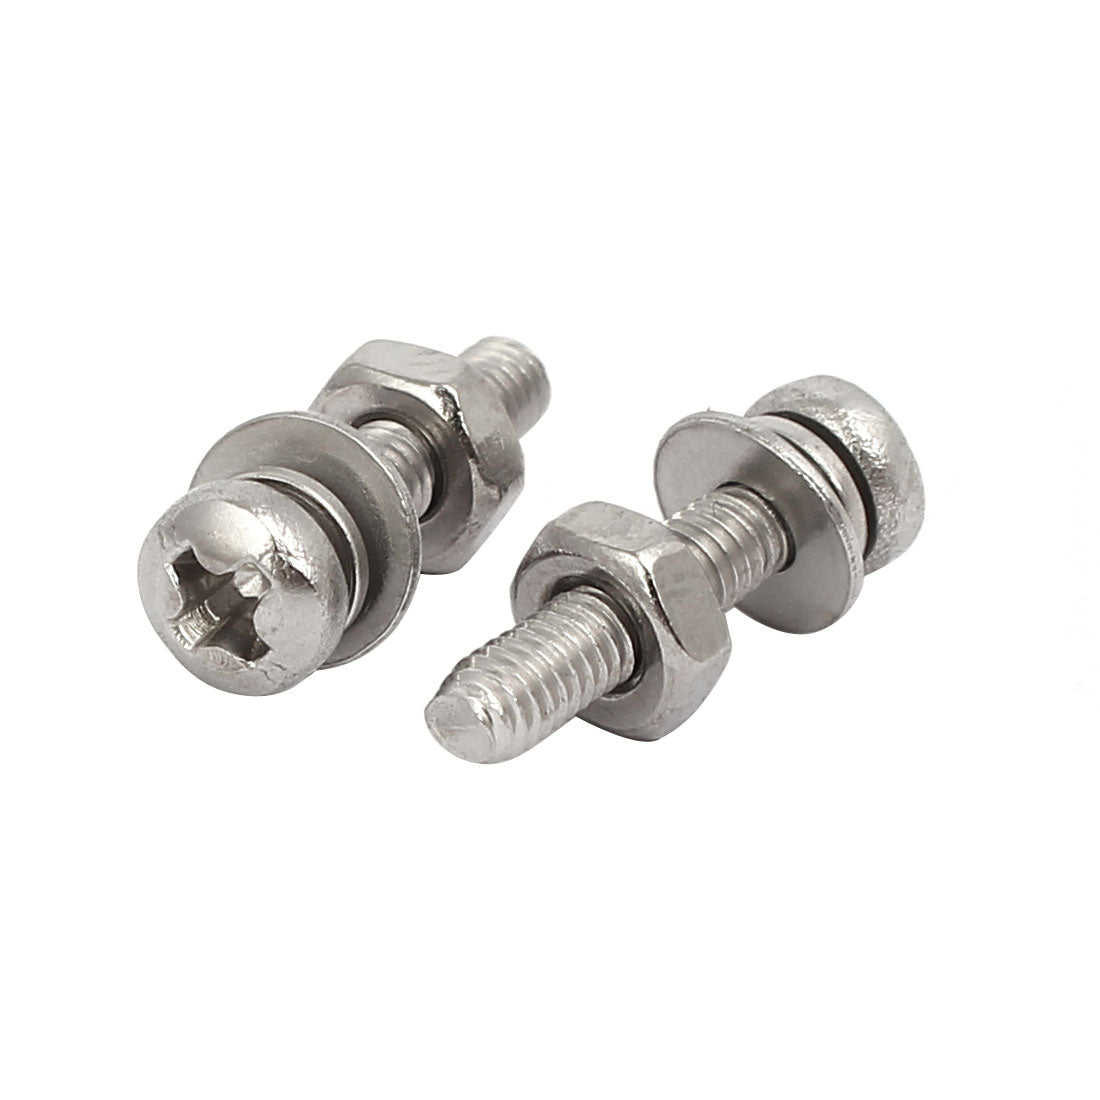 uxcell Uxcell M2.5x12mm 304 Stainless Steel Phillips Pan Head Bolt Screw Nut w Washer 35 Sets